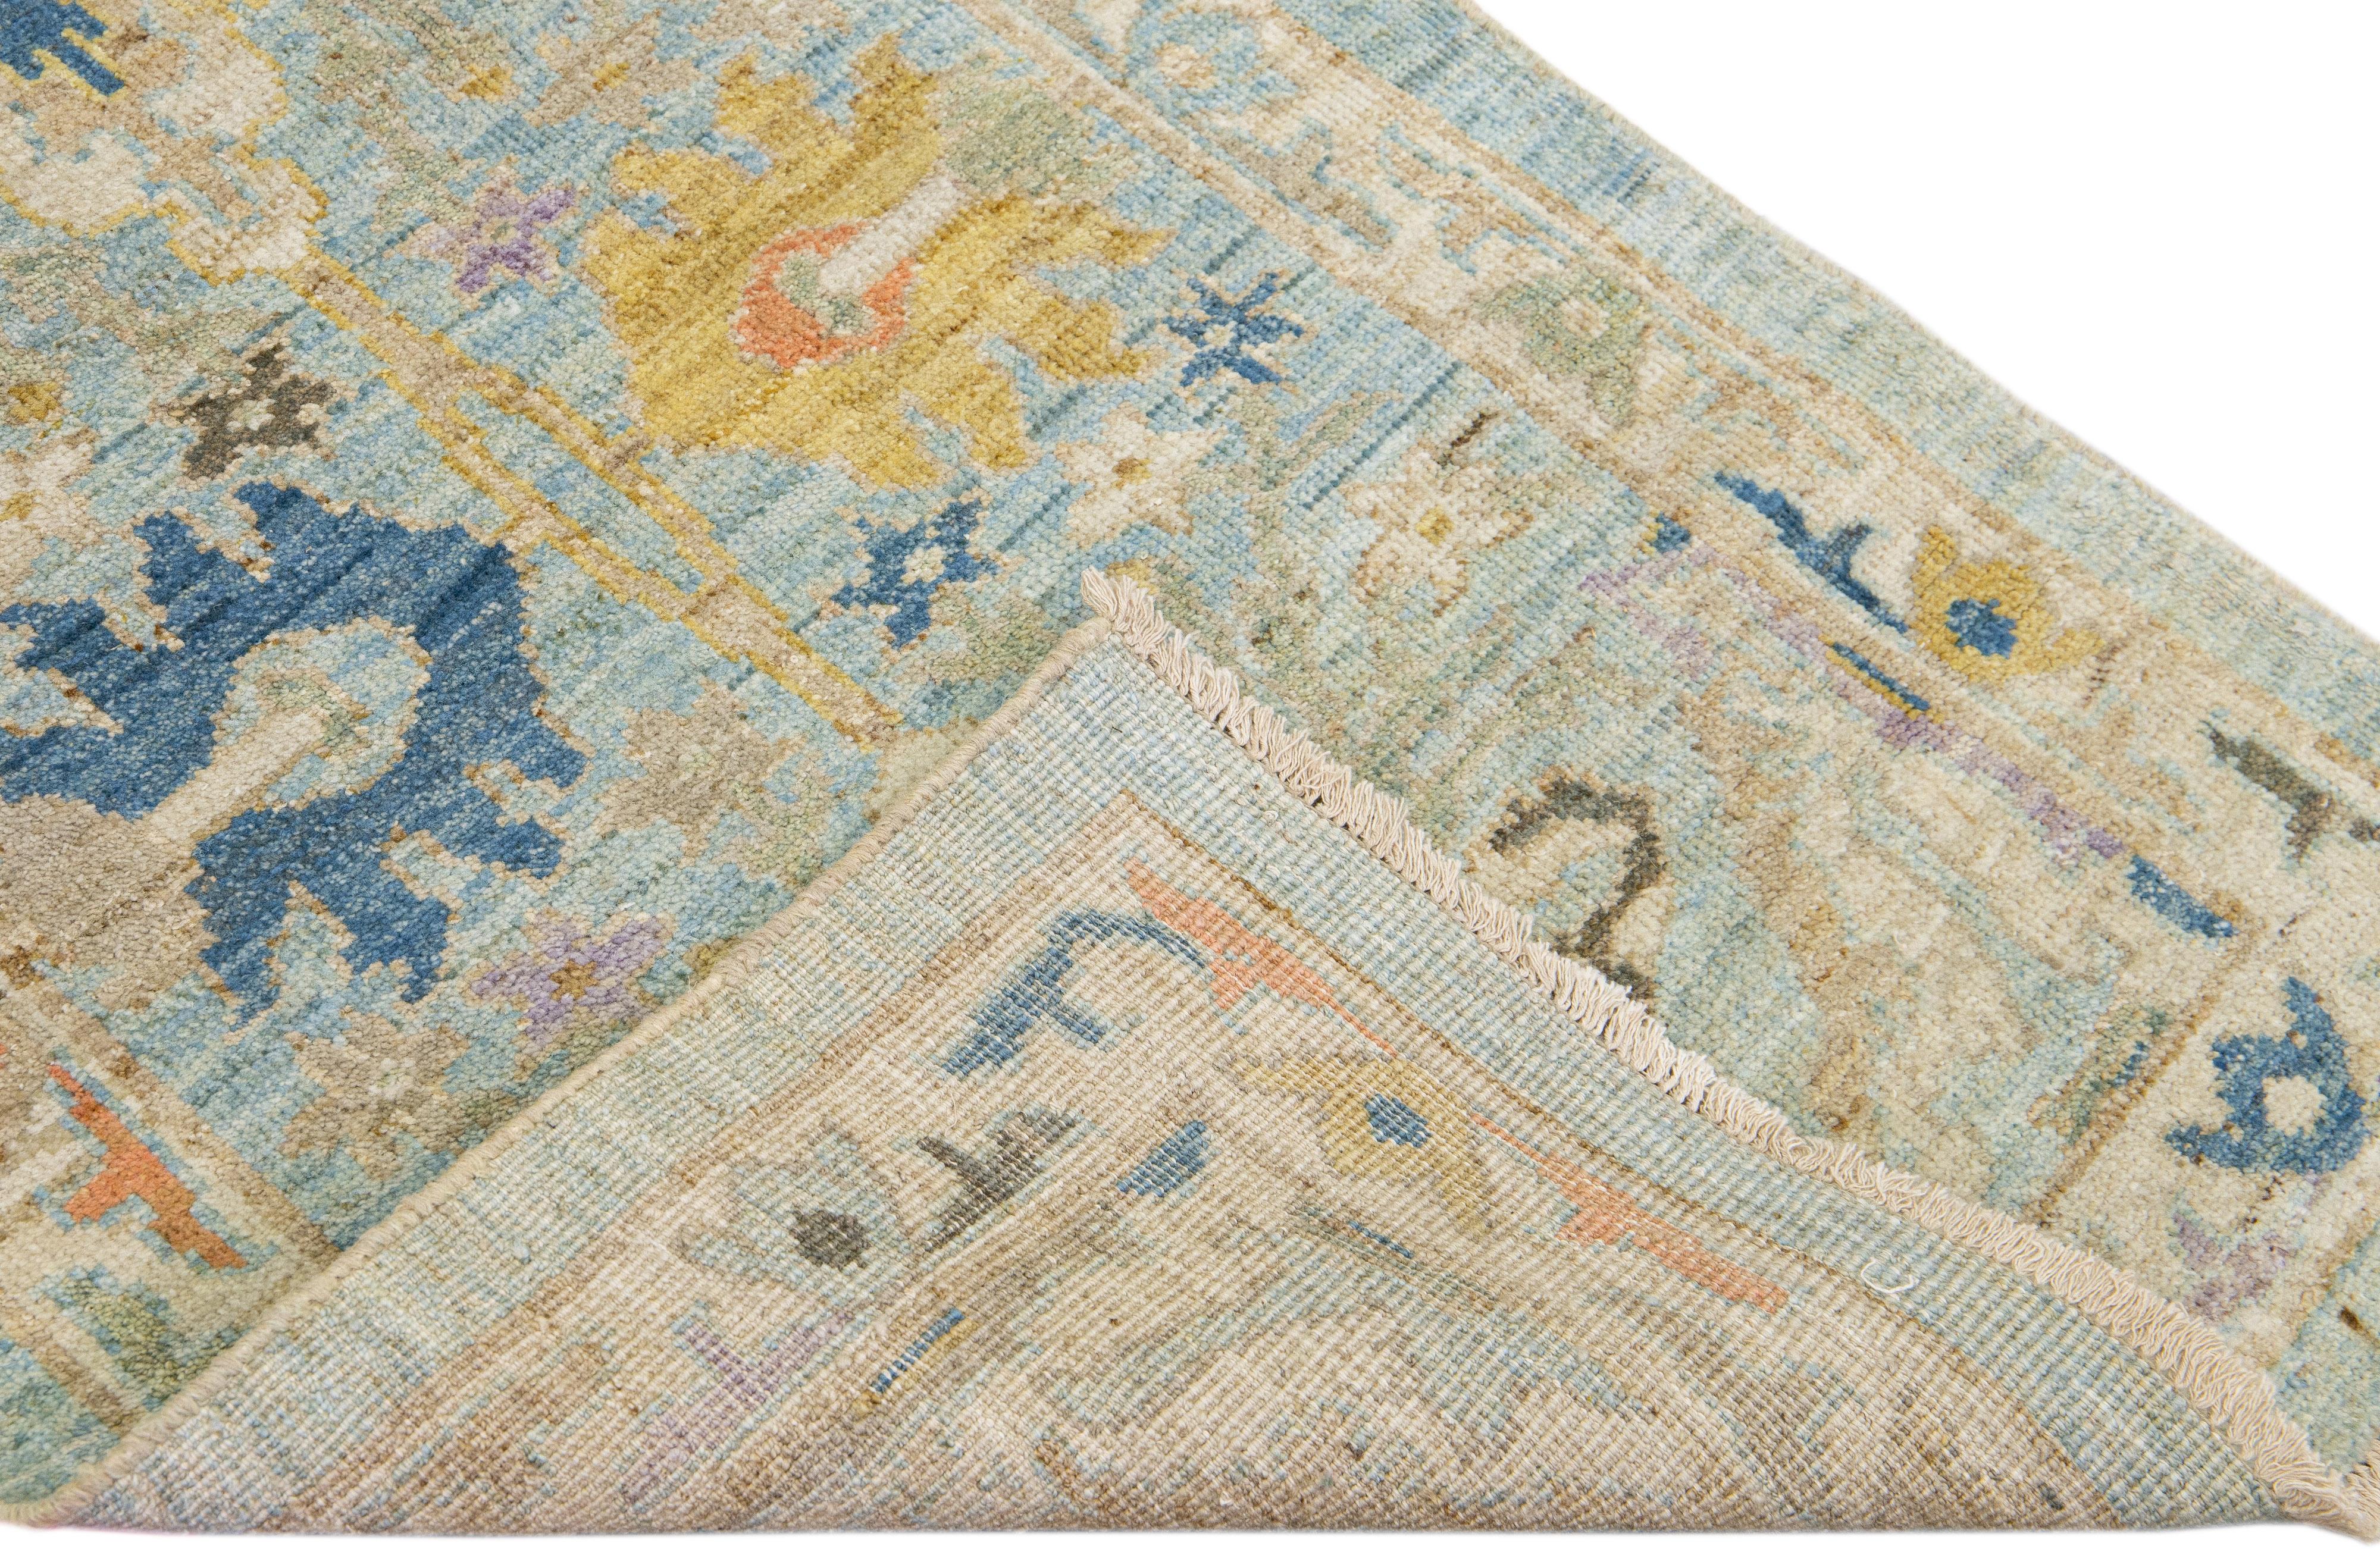 Beautiful modern Mahal hand-knotted wool runner with a light blue field. This Piece has multicolor accents in a gorgeous all-over Classic floral design.

This rug measures: 2'9'' x 16'. 

Our rugs are professional cleaning before shipping.

